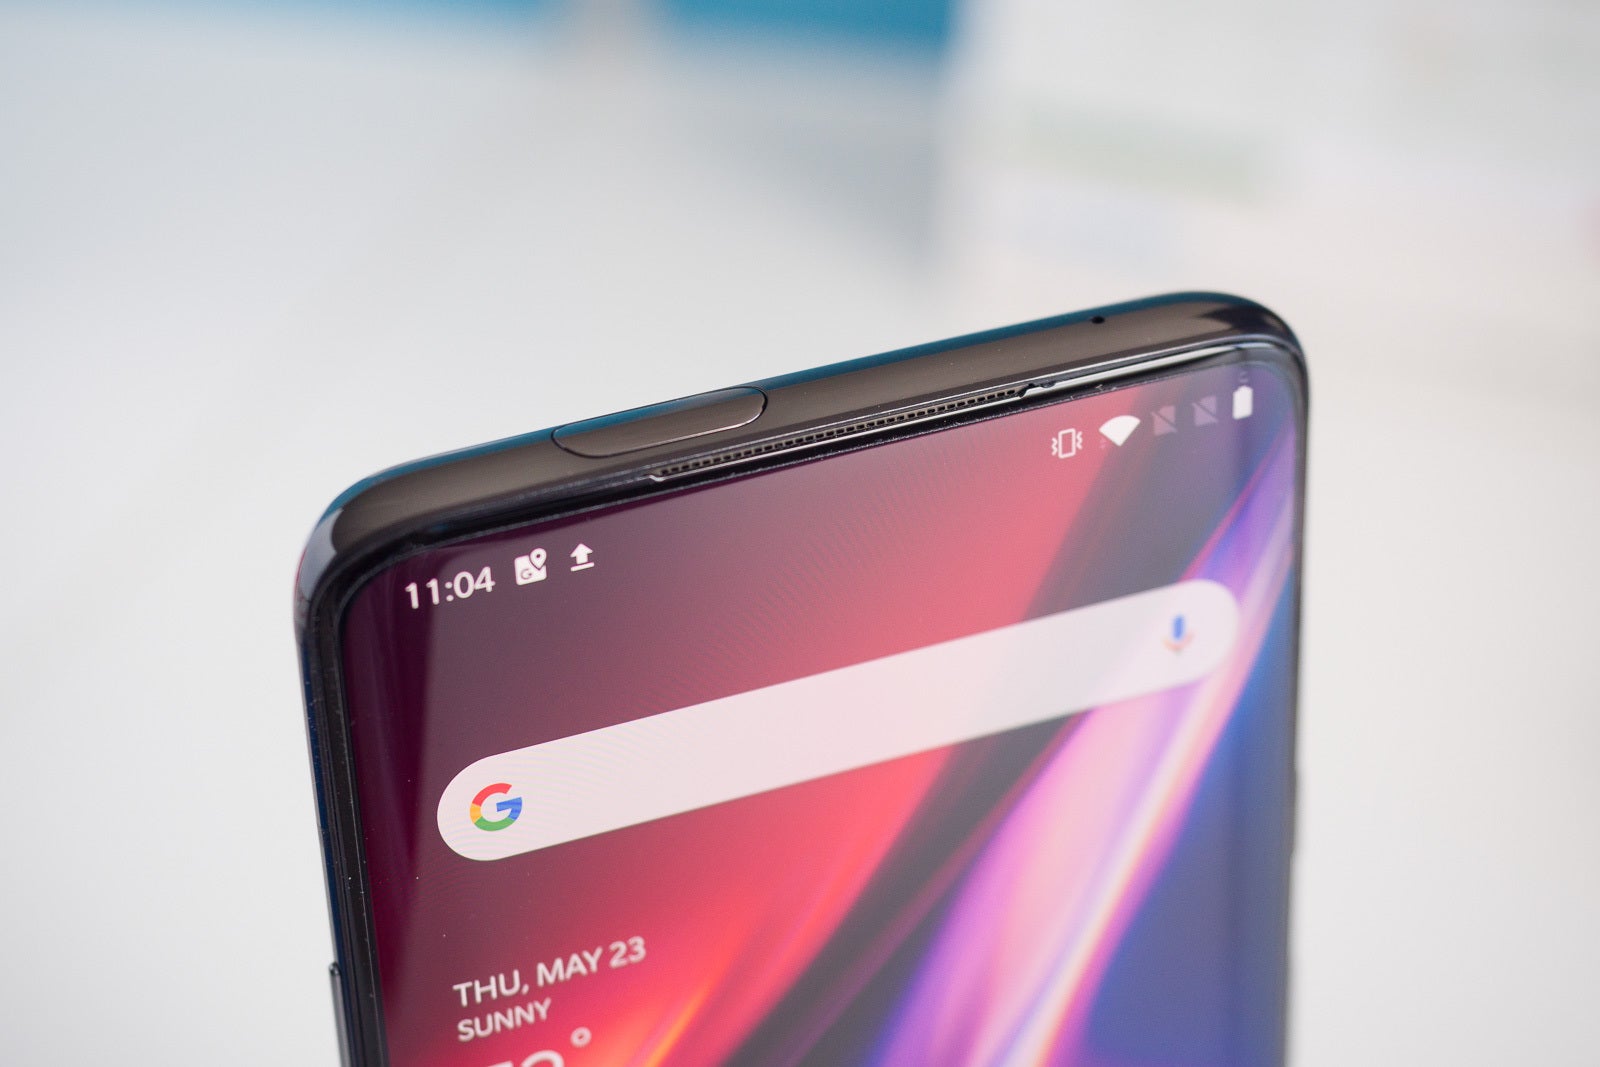 The OnePlus 7 Pro - Here's what the OnePlus 7T &amp; 7T Pro might look like from the rear